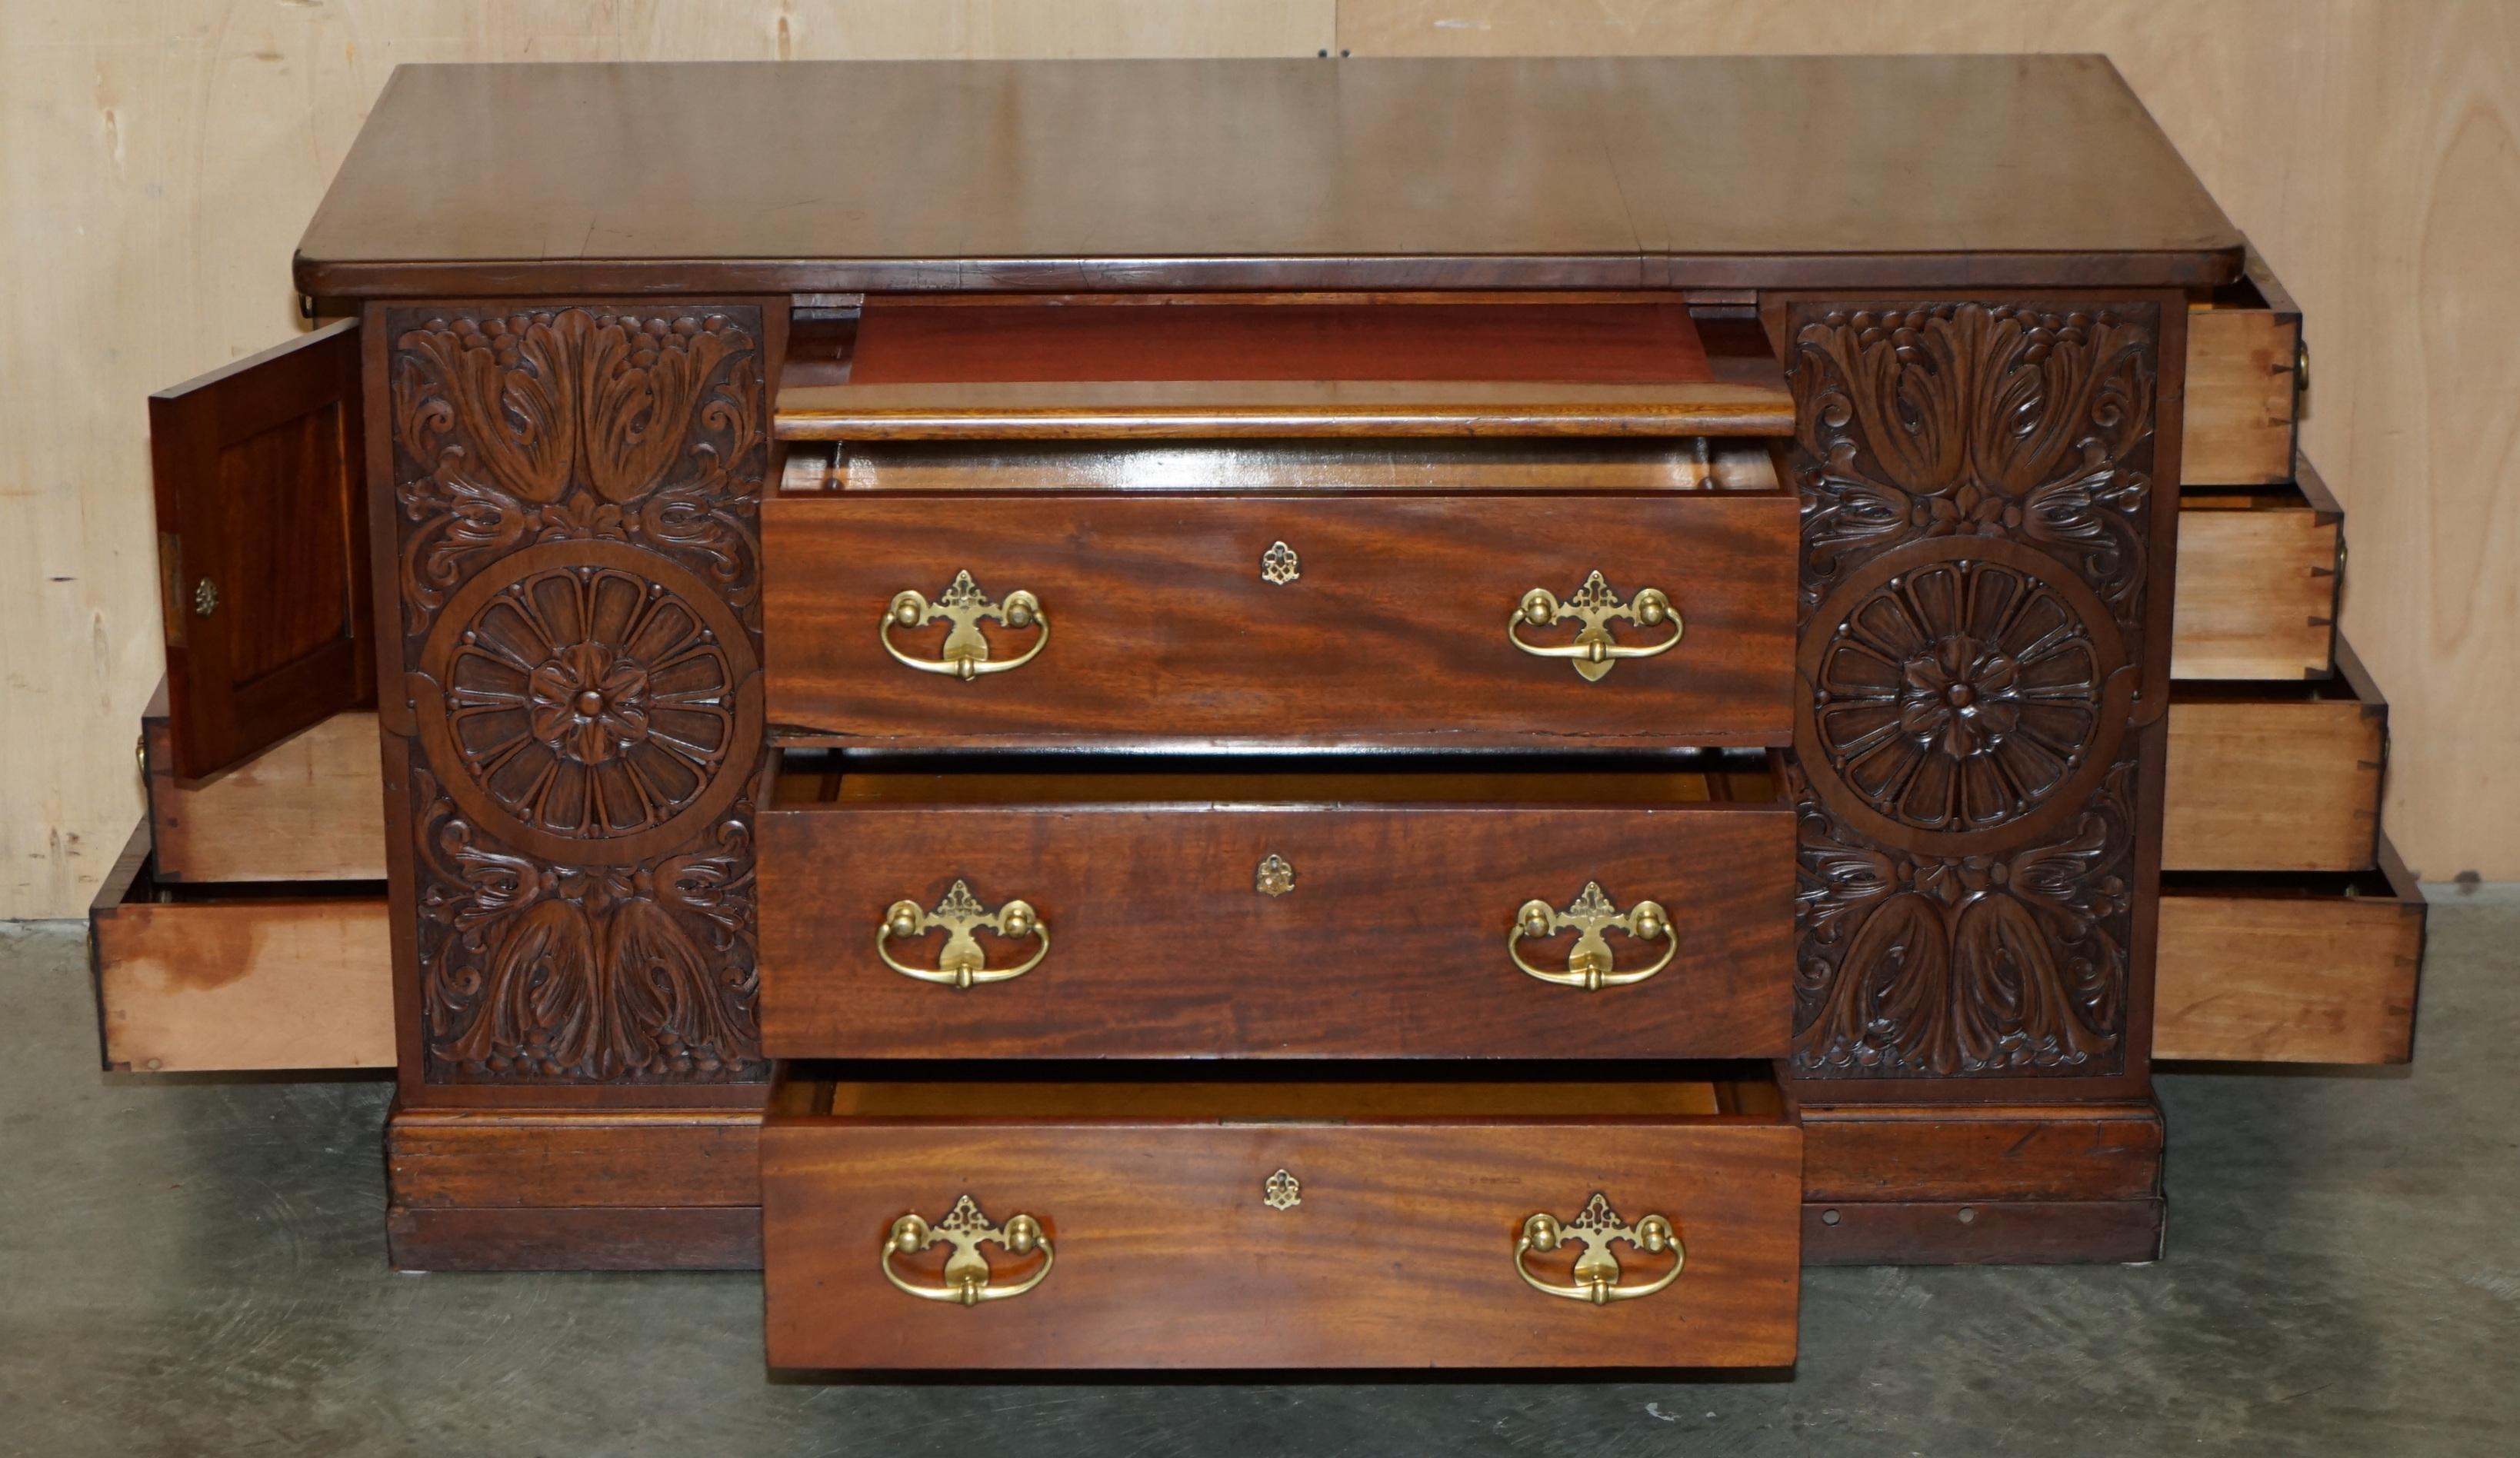 RIESIGE ANTIQUE VICTORIAN THOMAS CHIPPENDALE ESTATE DESK OR TWO SIDEBOARD DRAWERs im Angebot 9